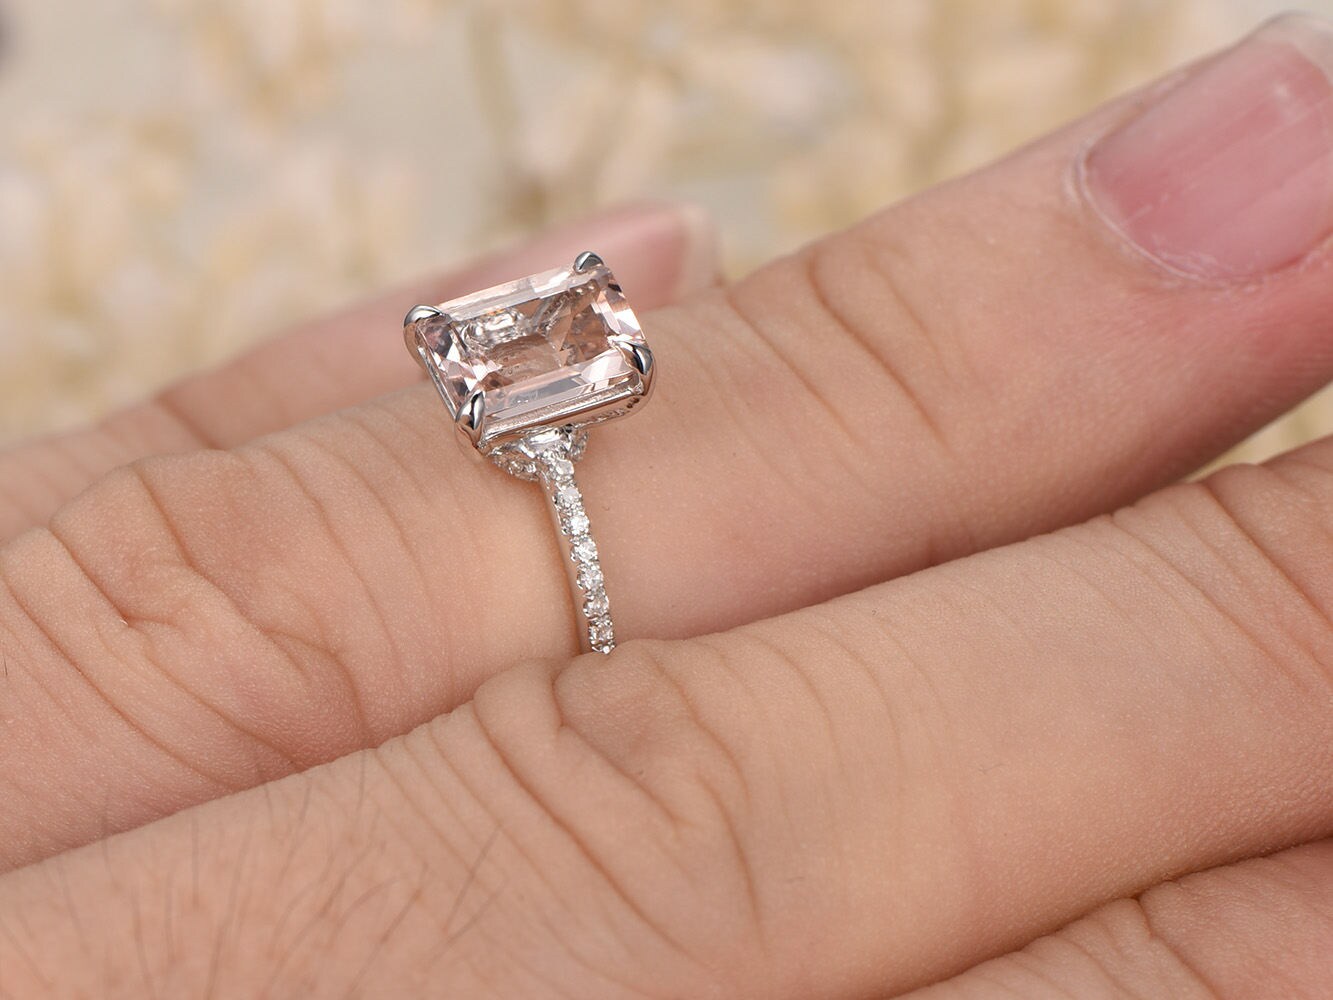 79mm Emerald Cut Morganite Ring Solid 14k White Gold Pink